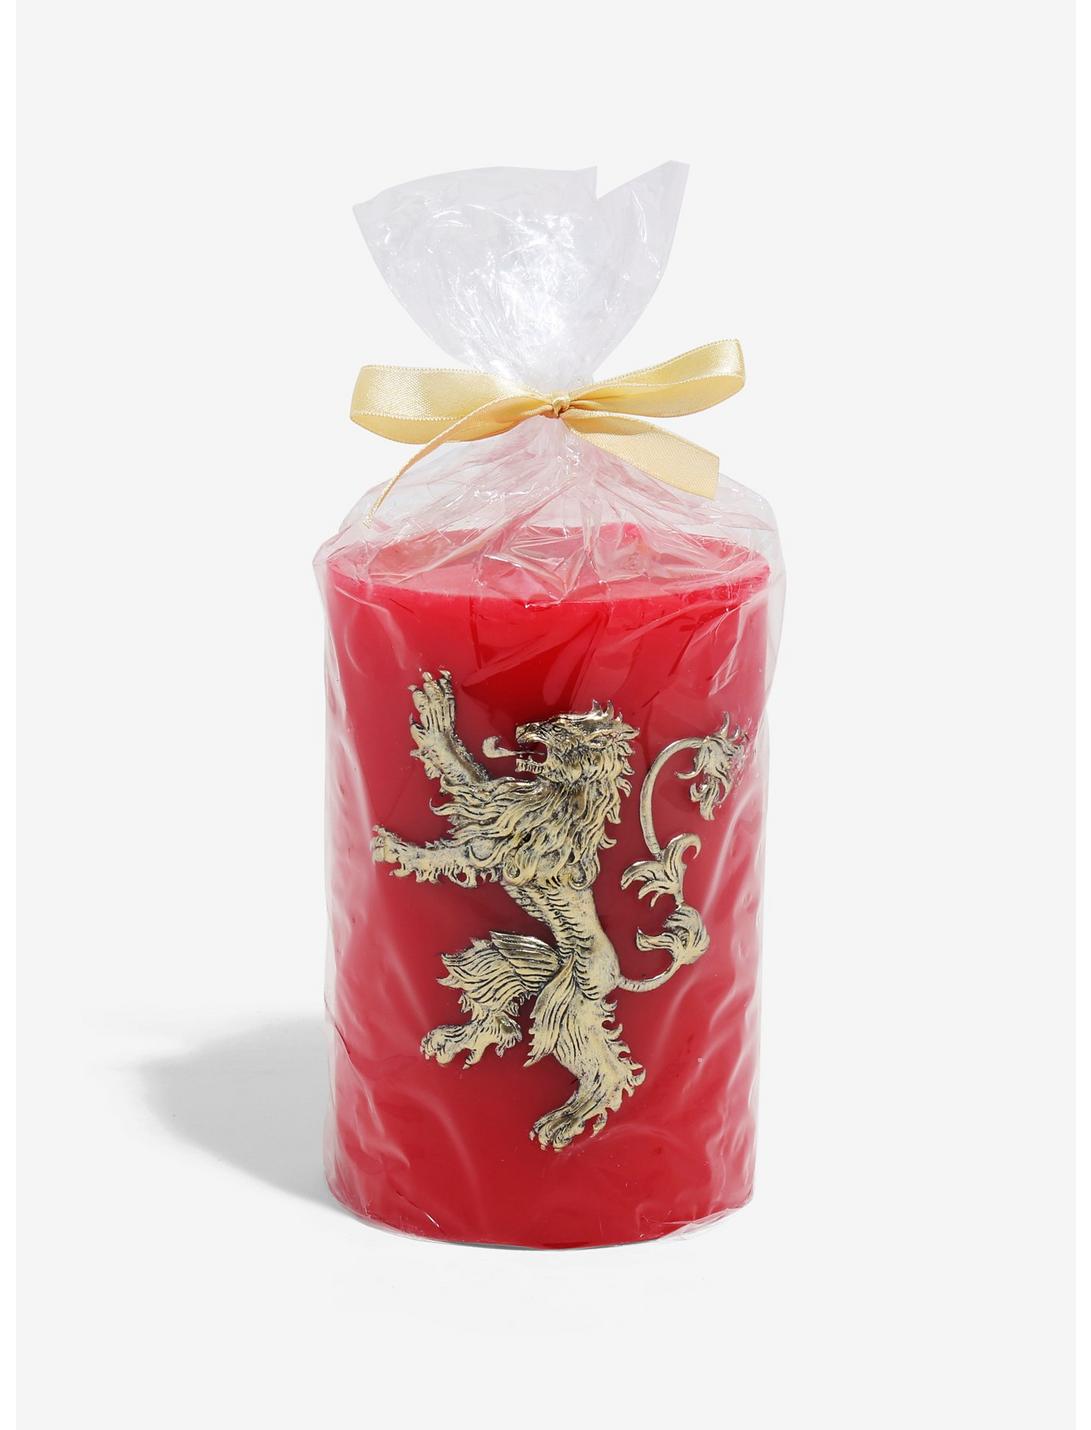 Game Of Thrones Lannister House Sigil Candle, , hi-res